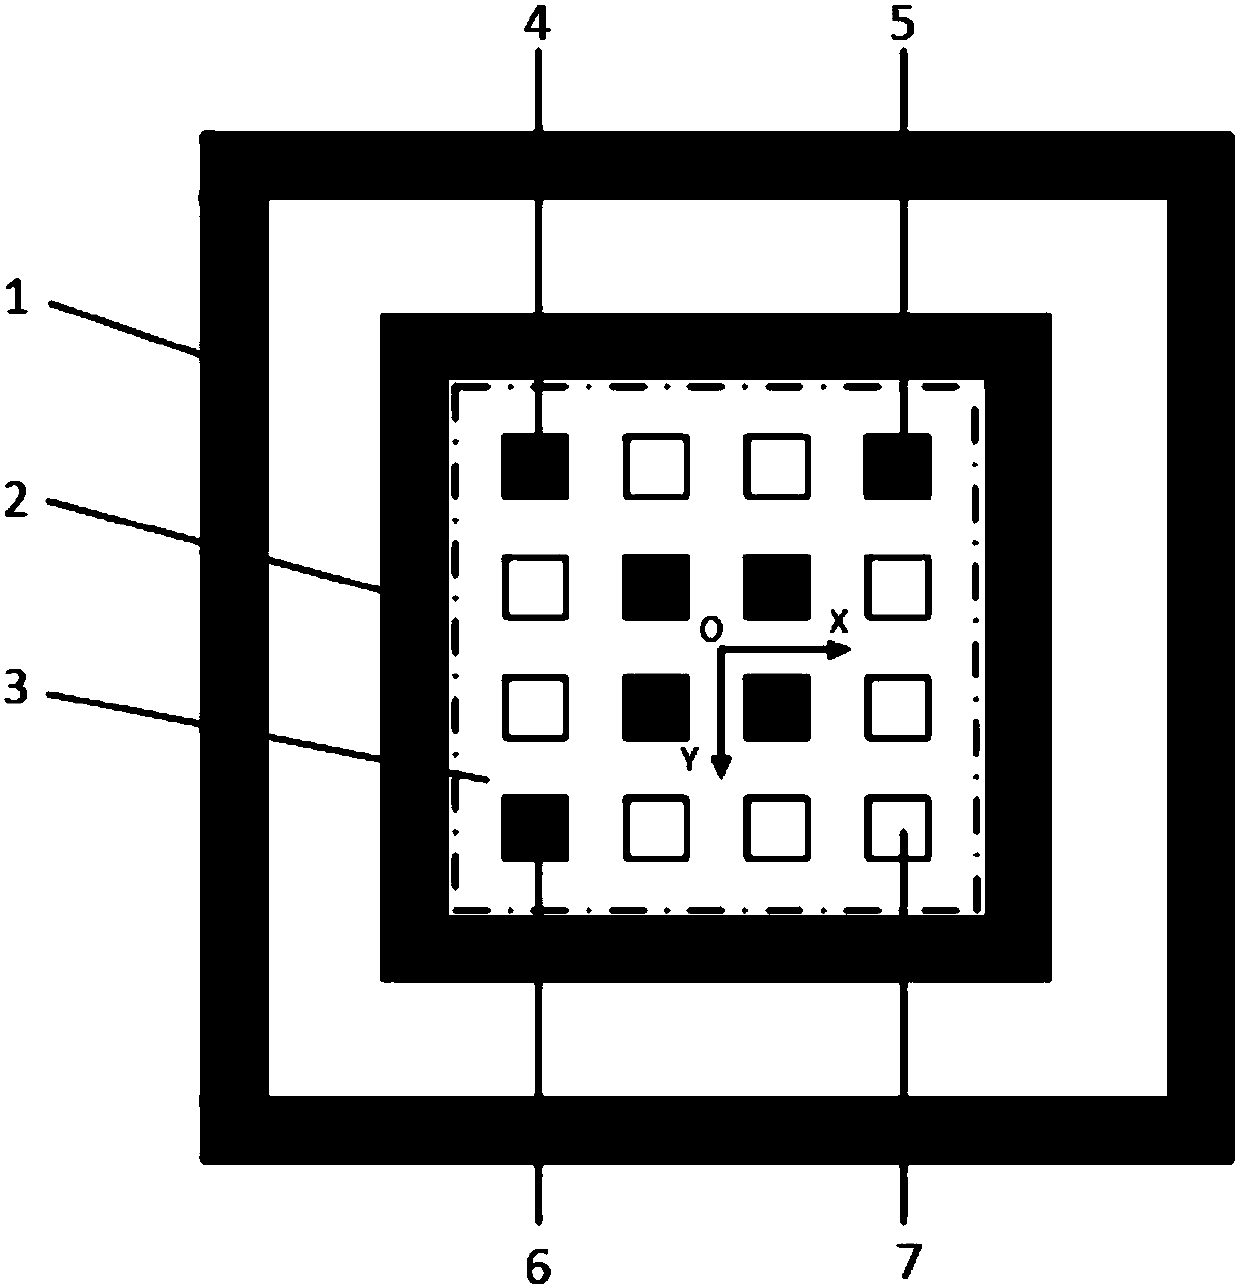 Regular graphic code used for locating indoor mobile robot and locating method